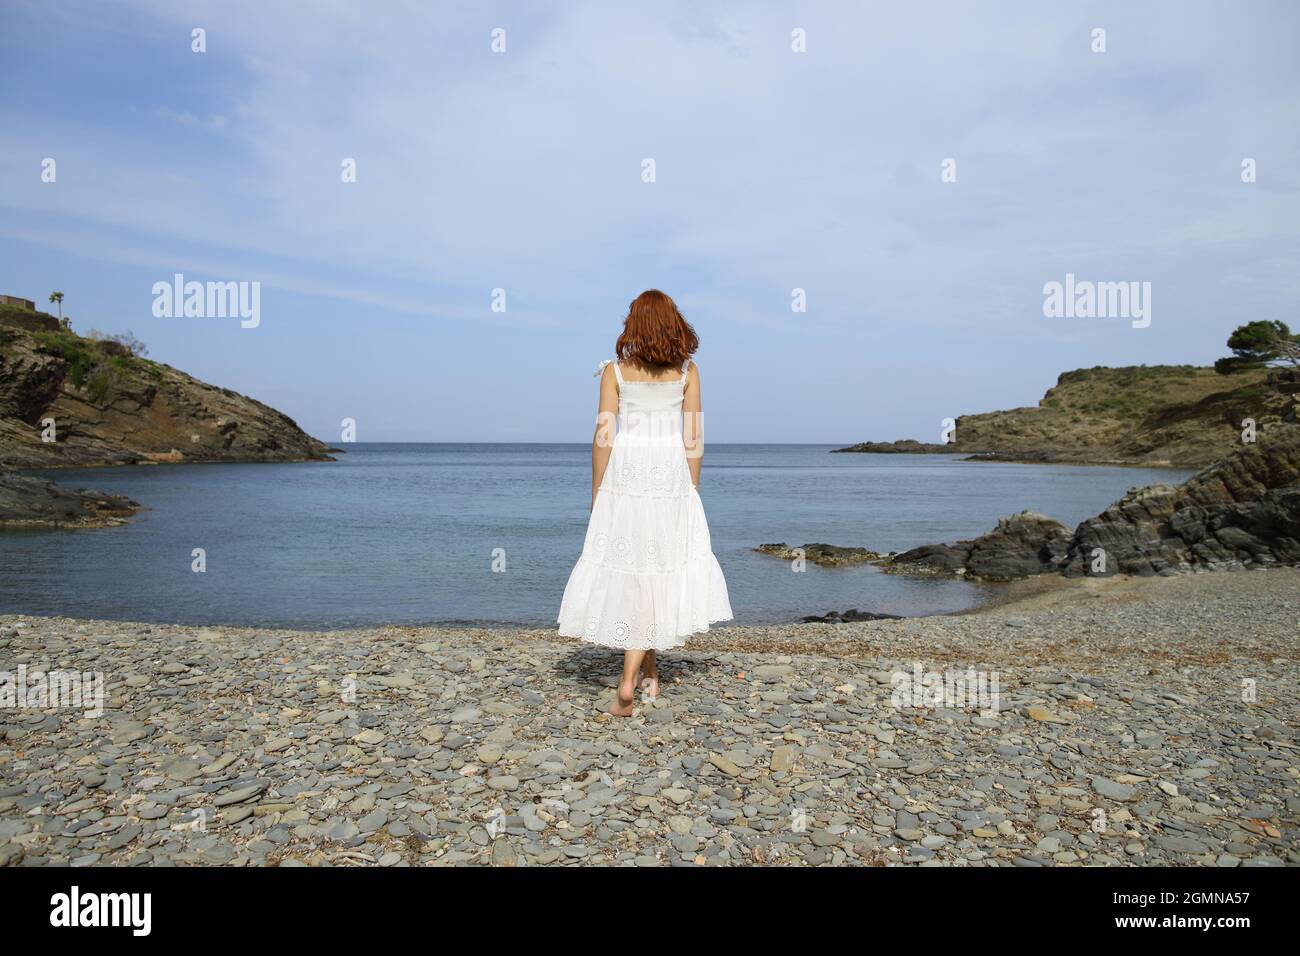 Back view full body portrait of a woman walking towards water contemplating views on the beach Stock Photo